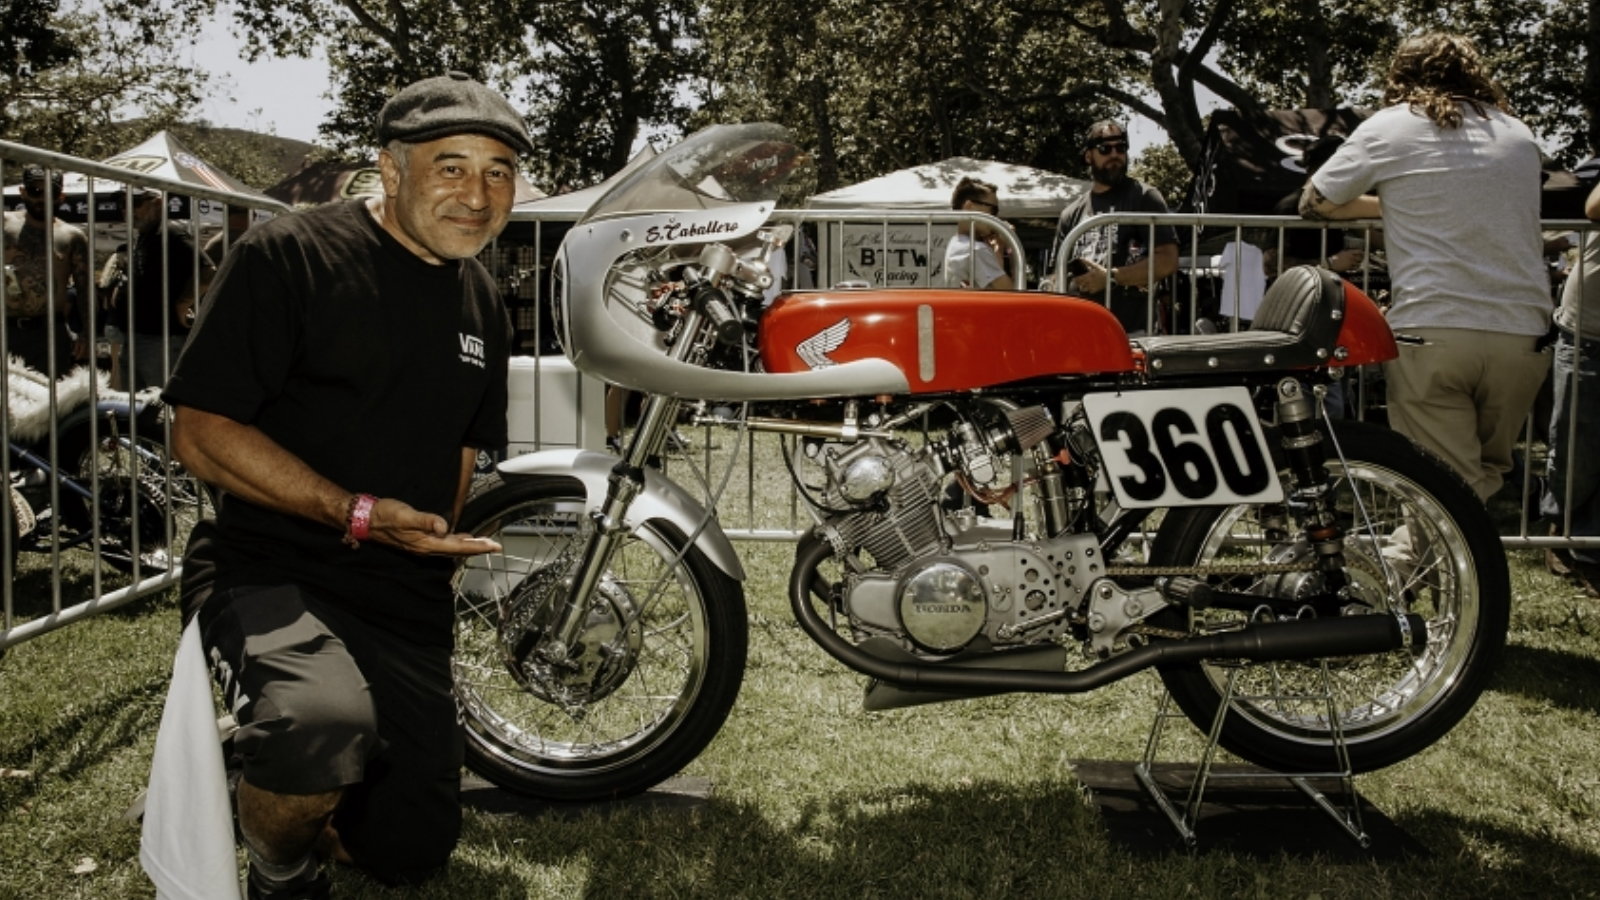 Born Free Motorcycle Show Coverage | Hdforums